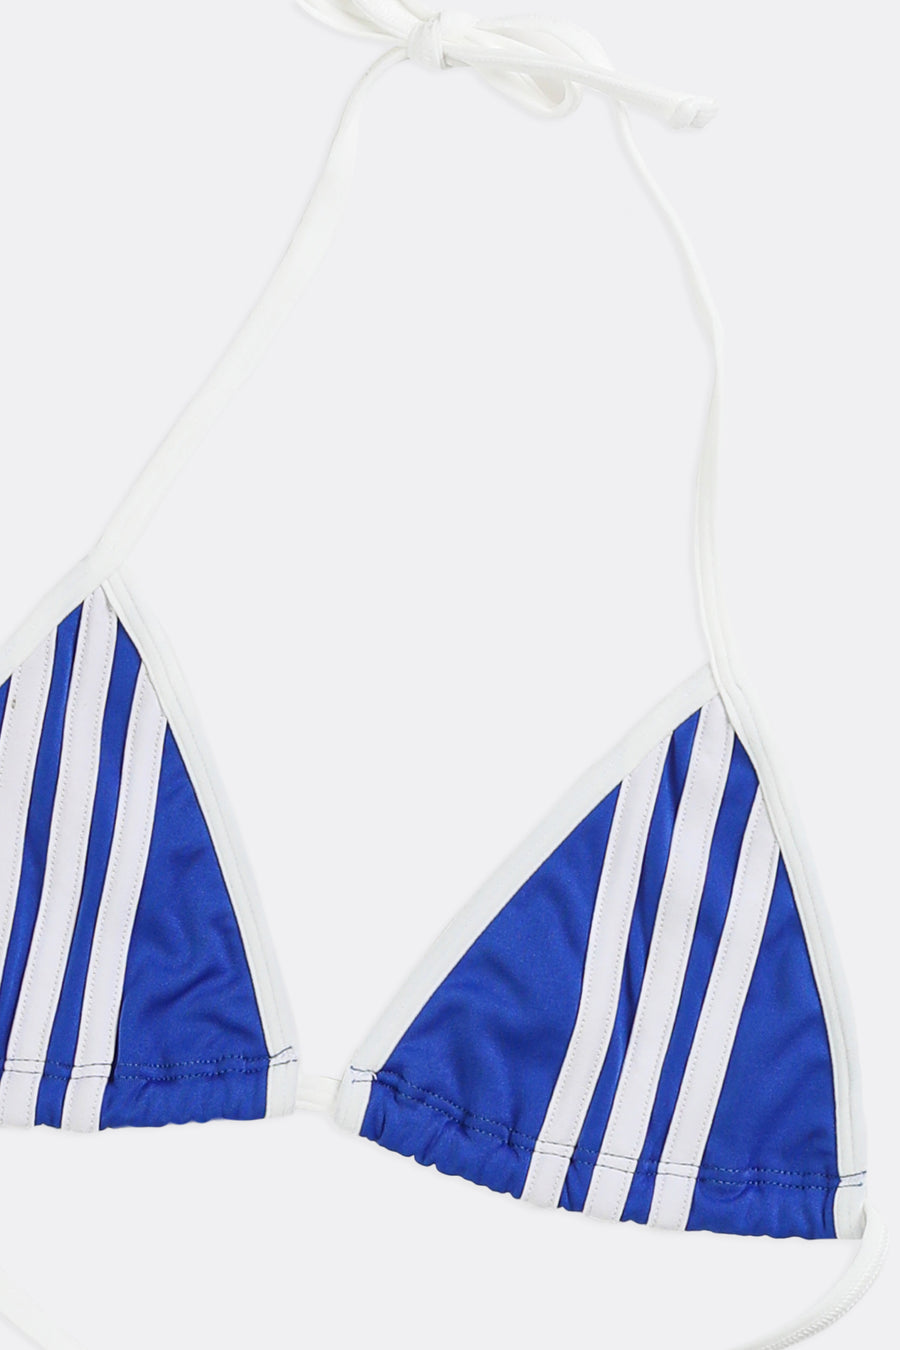 Rework Adidas Athletic Triangle Top - S